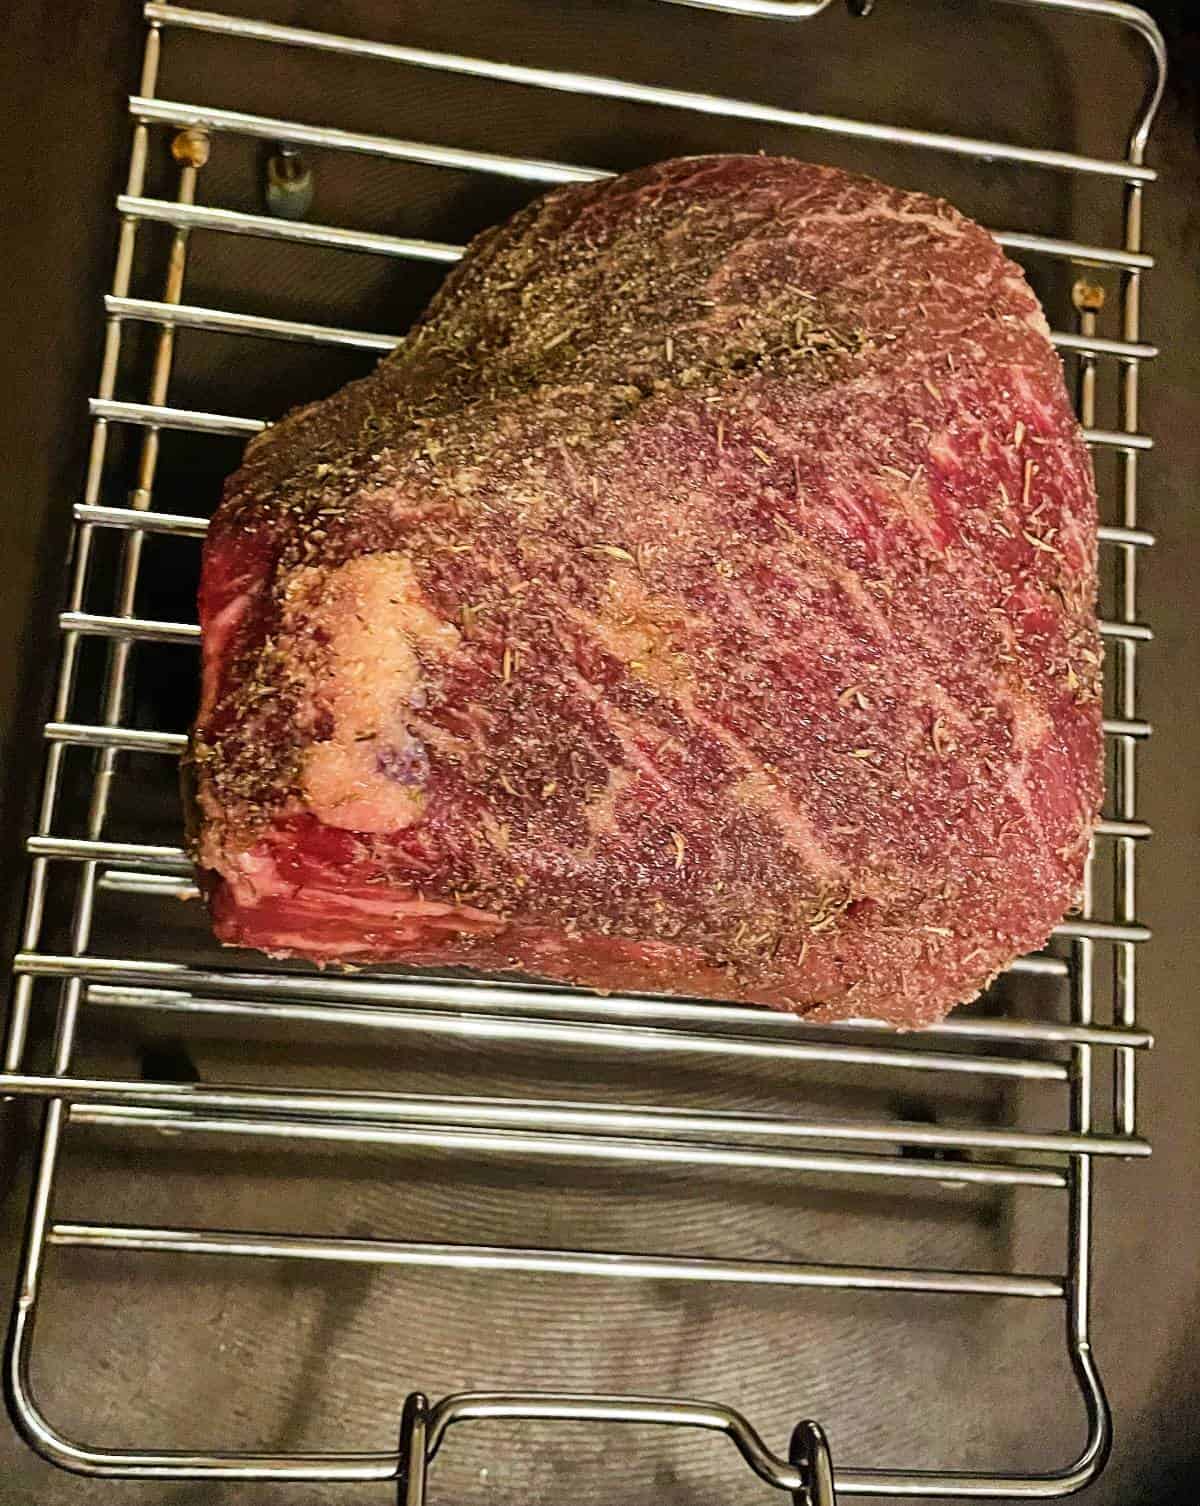 top round roast beef, on a roasting rack, prior to being put into the oven.